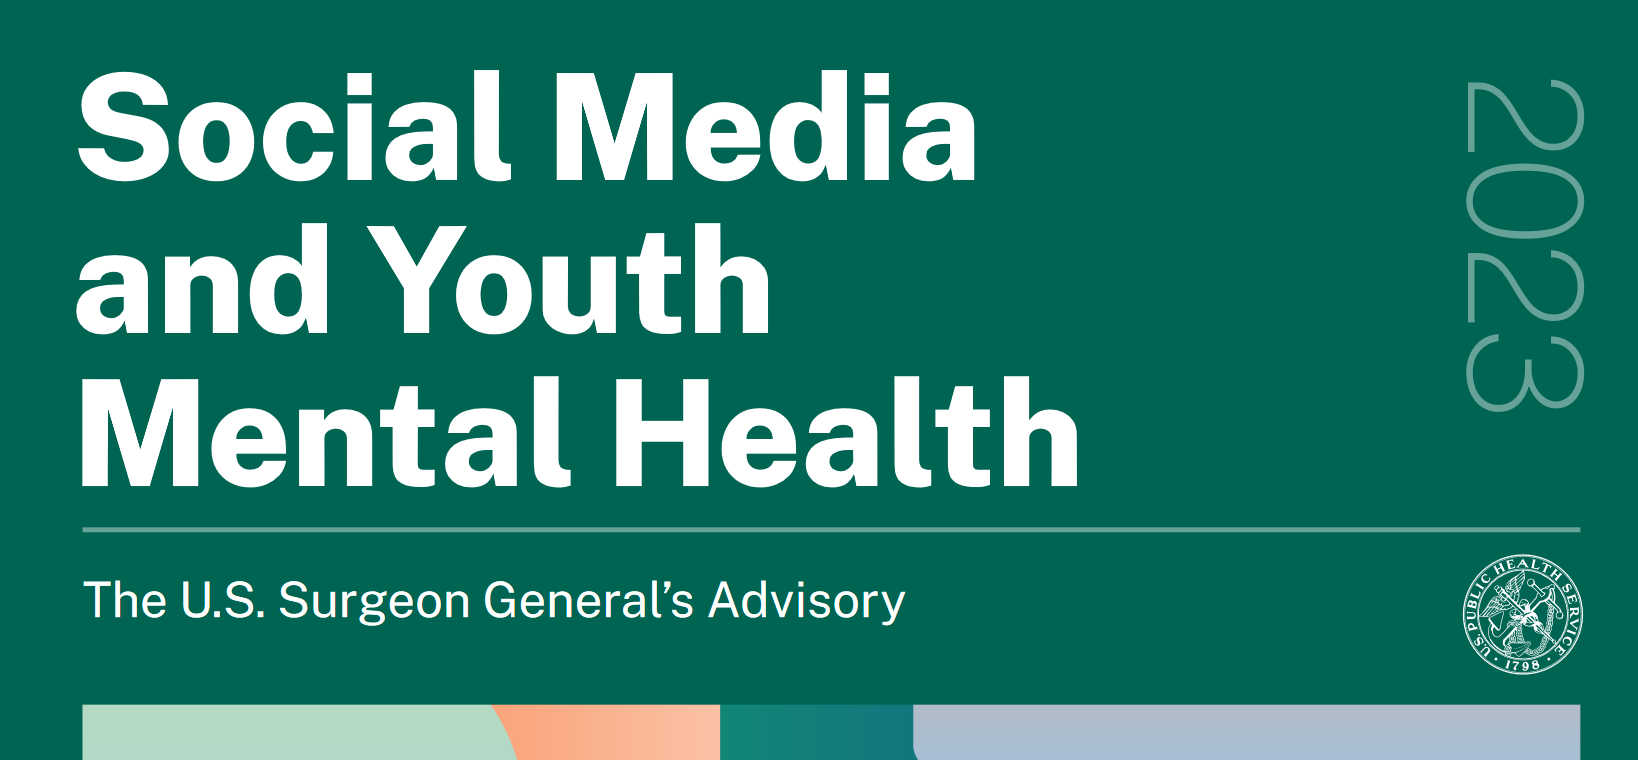 New Report on Children and Social Media